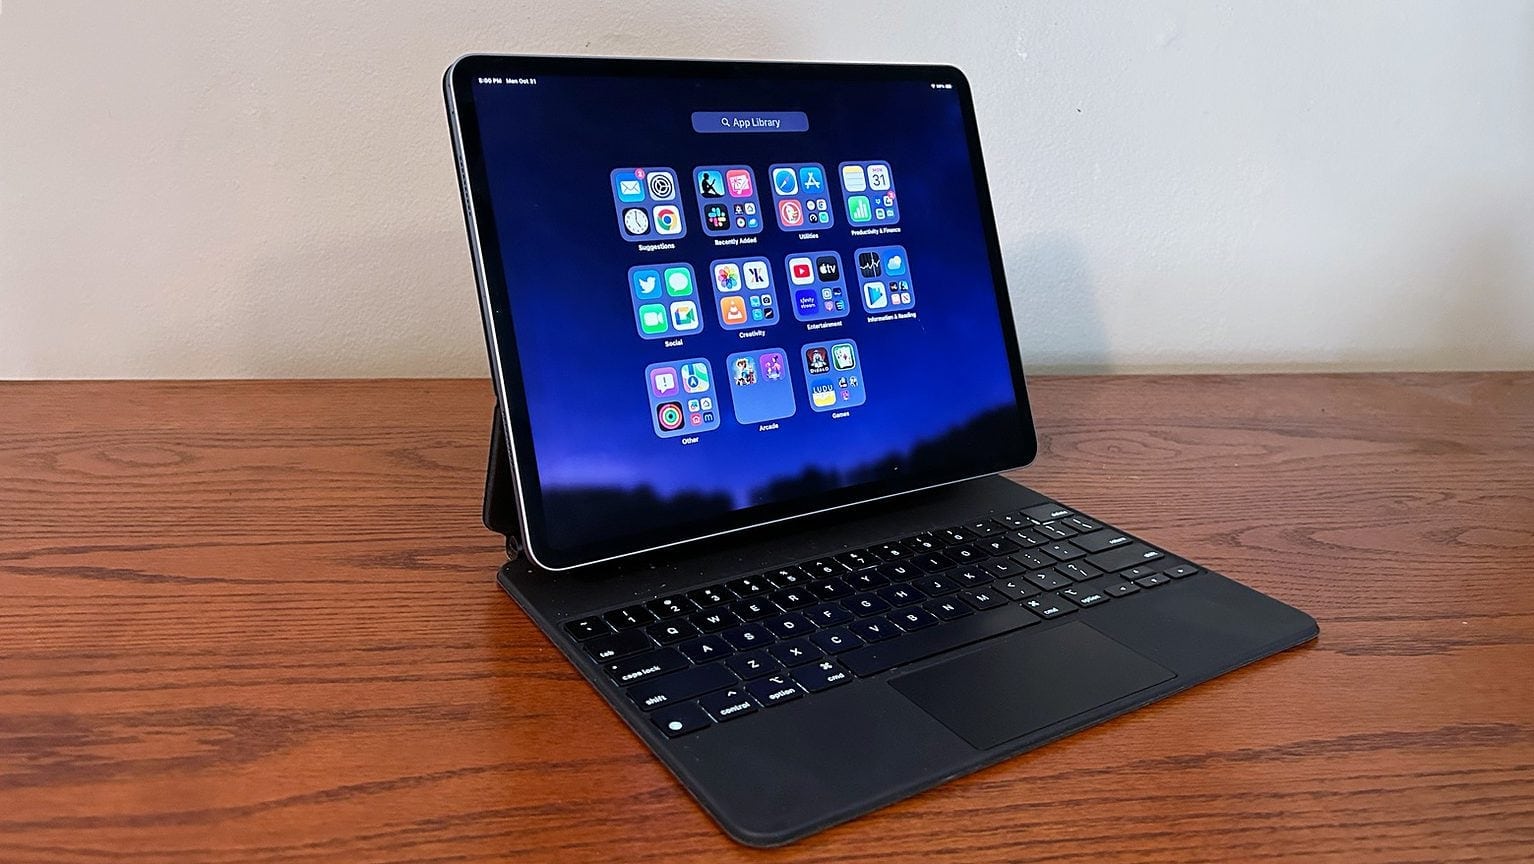 It's not easy to find deals at $50 to $60 off Apple's Magic Keyboard cases for iPad.